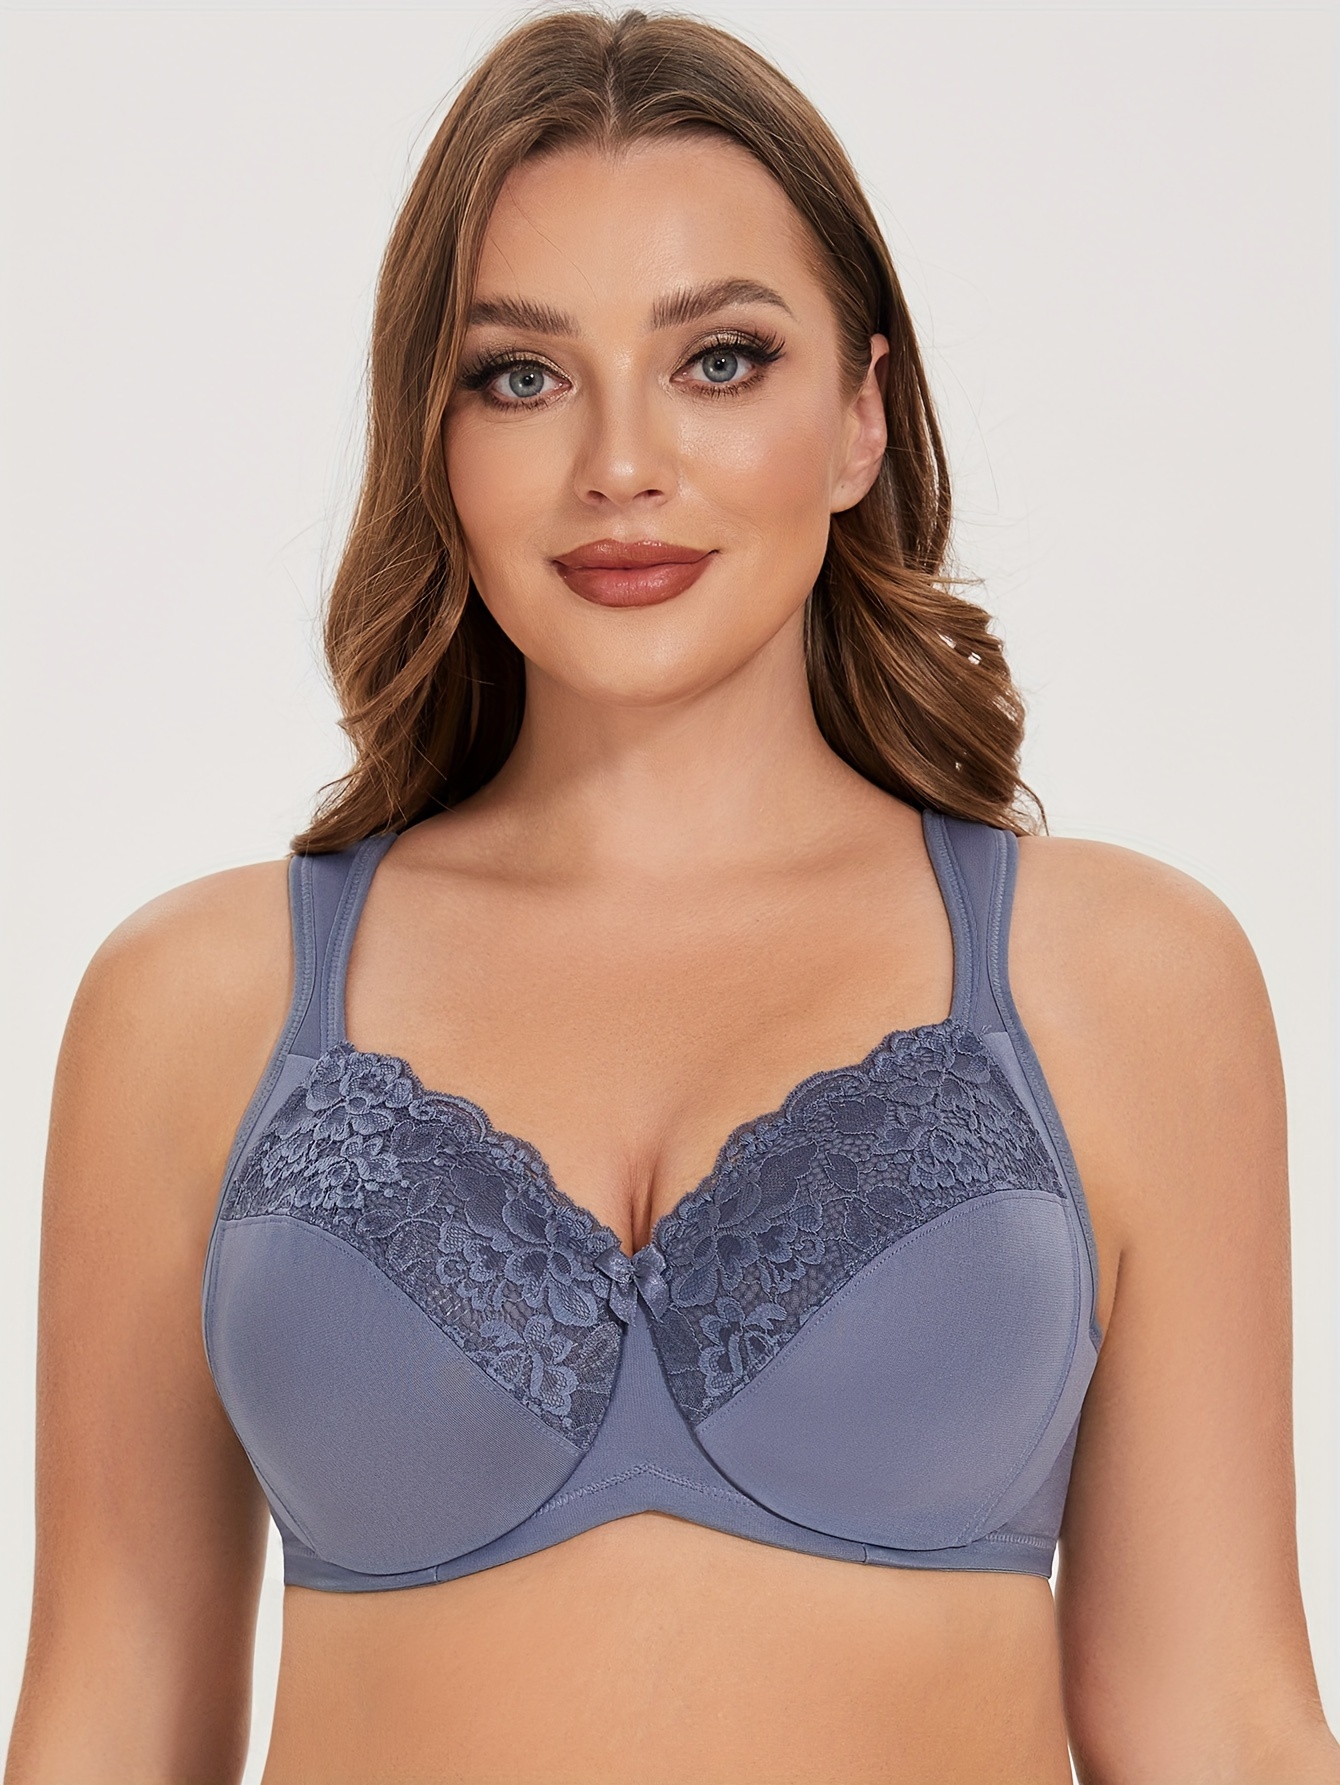 Plus Size Woman with Bow DOT Printed Padded Bra - China Plus Size